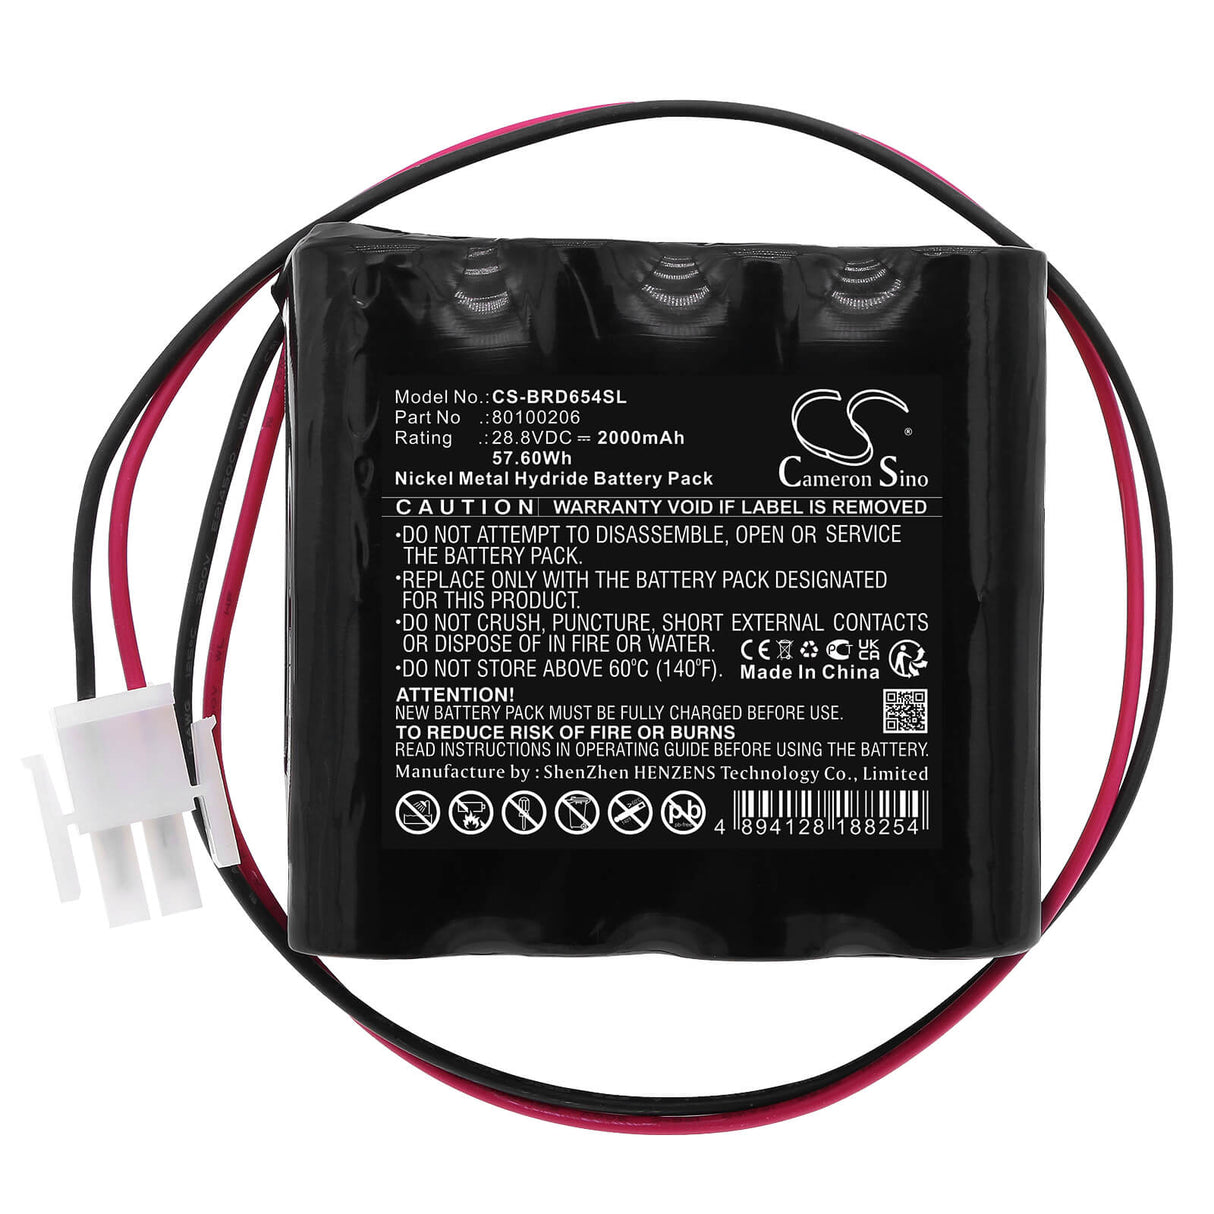 28.8v, Ni-mh, 2000mah, Battery Fits Besam, Rdb 654184, 57.60wh Batteries for Electronics Cameron Sino Technology Limited   